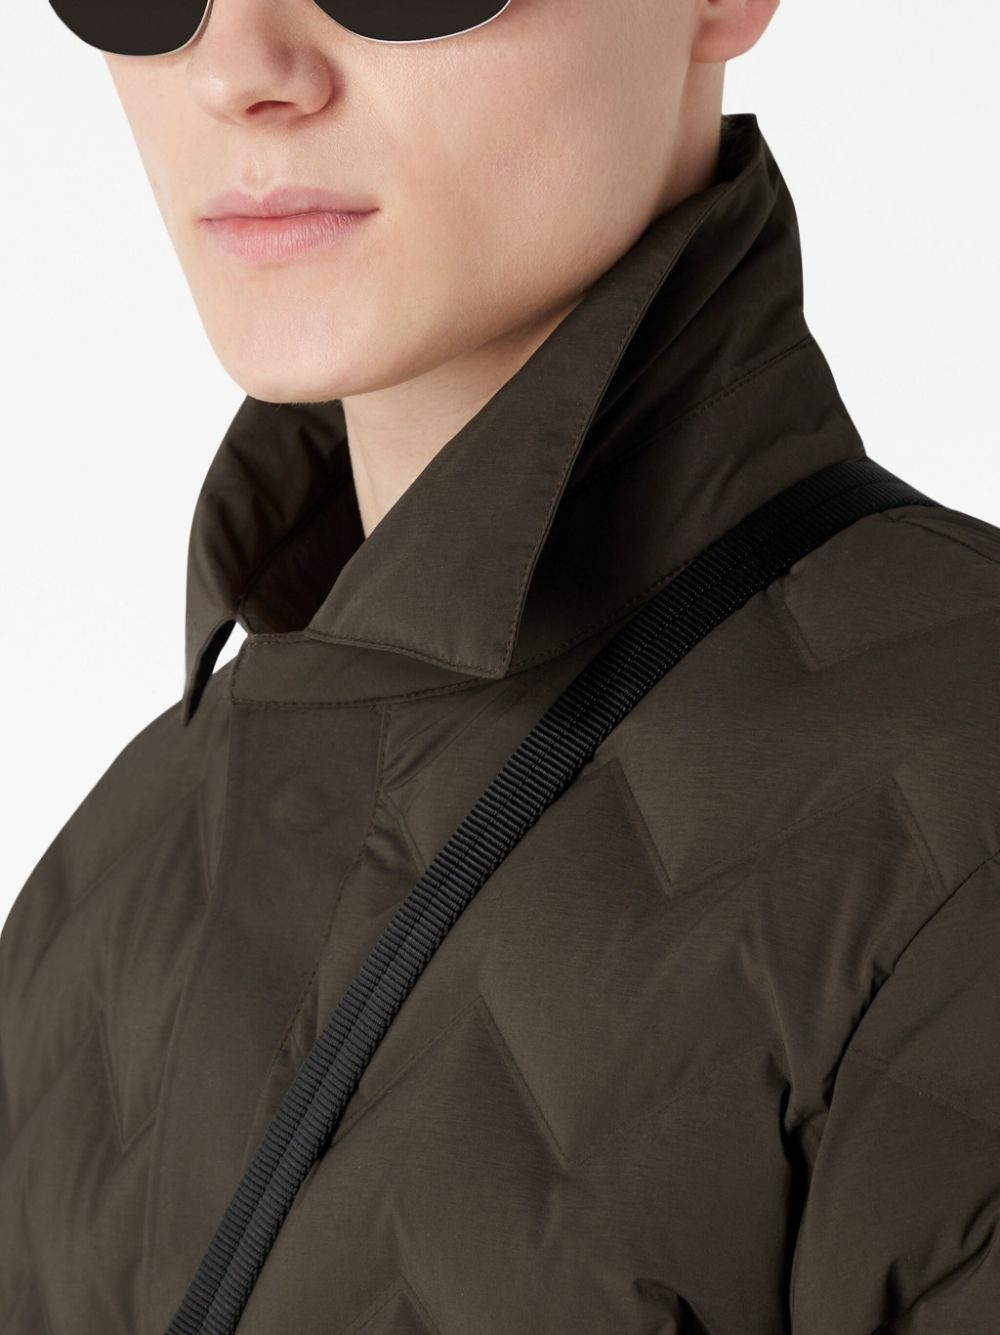 EMPORIO ARMANI - Padded Quilted Jacket